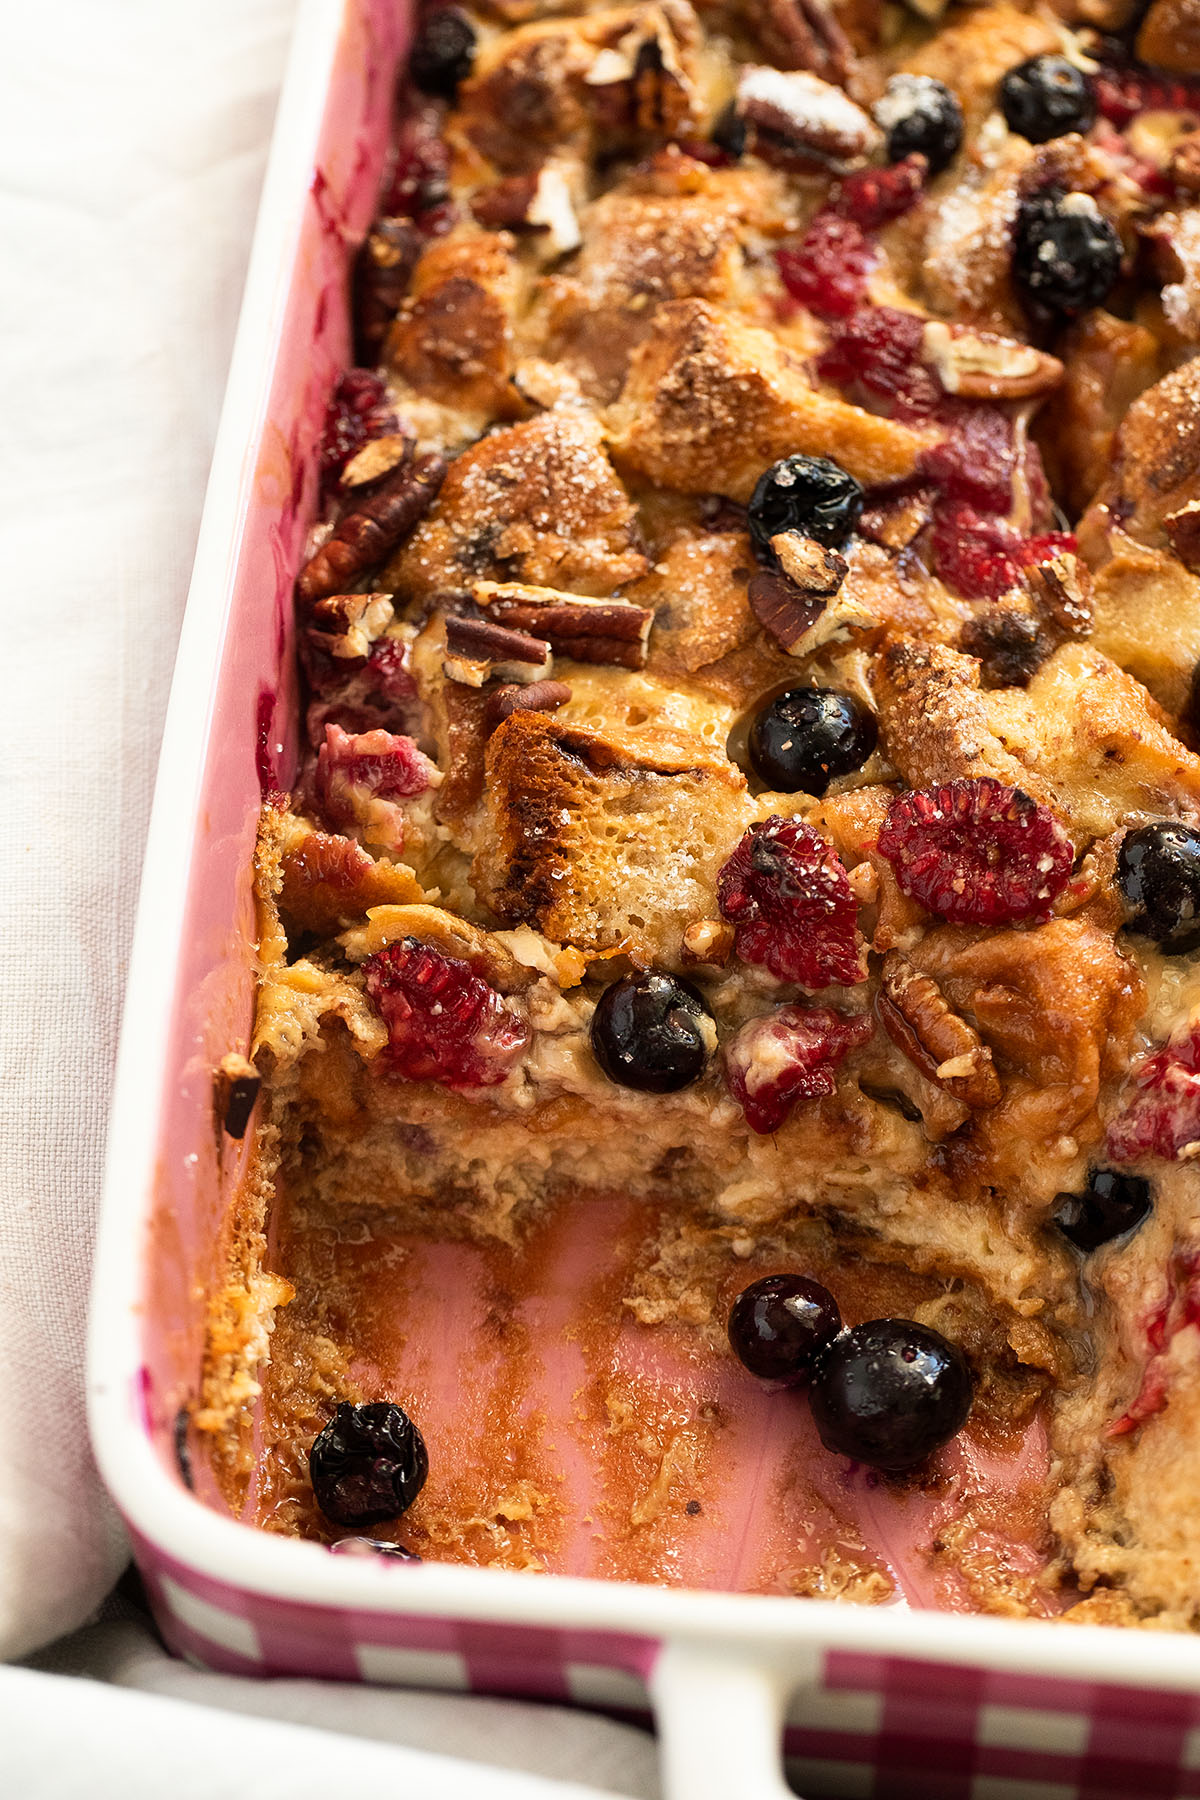 scooped french toast casserole with chocolate chip brioche bread and berries.